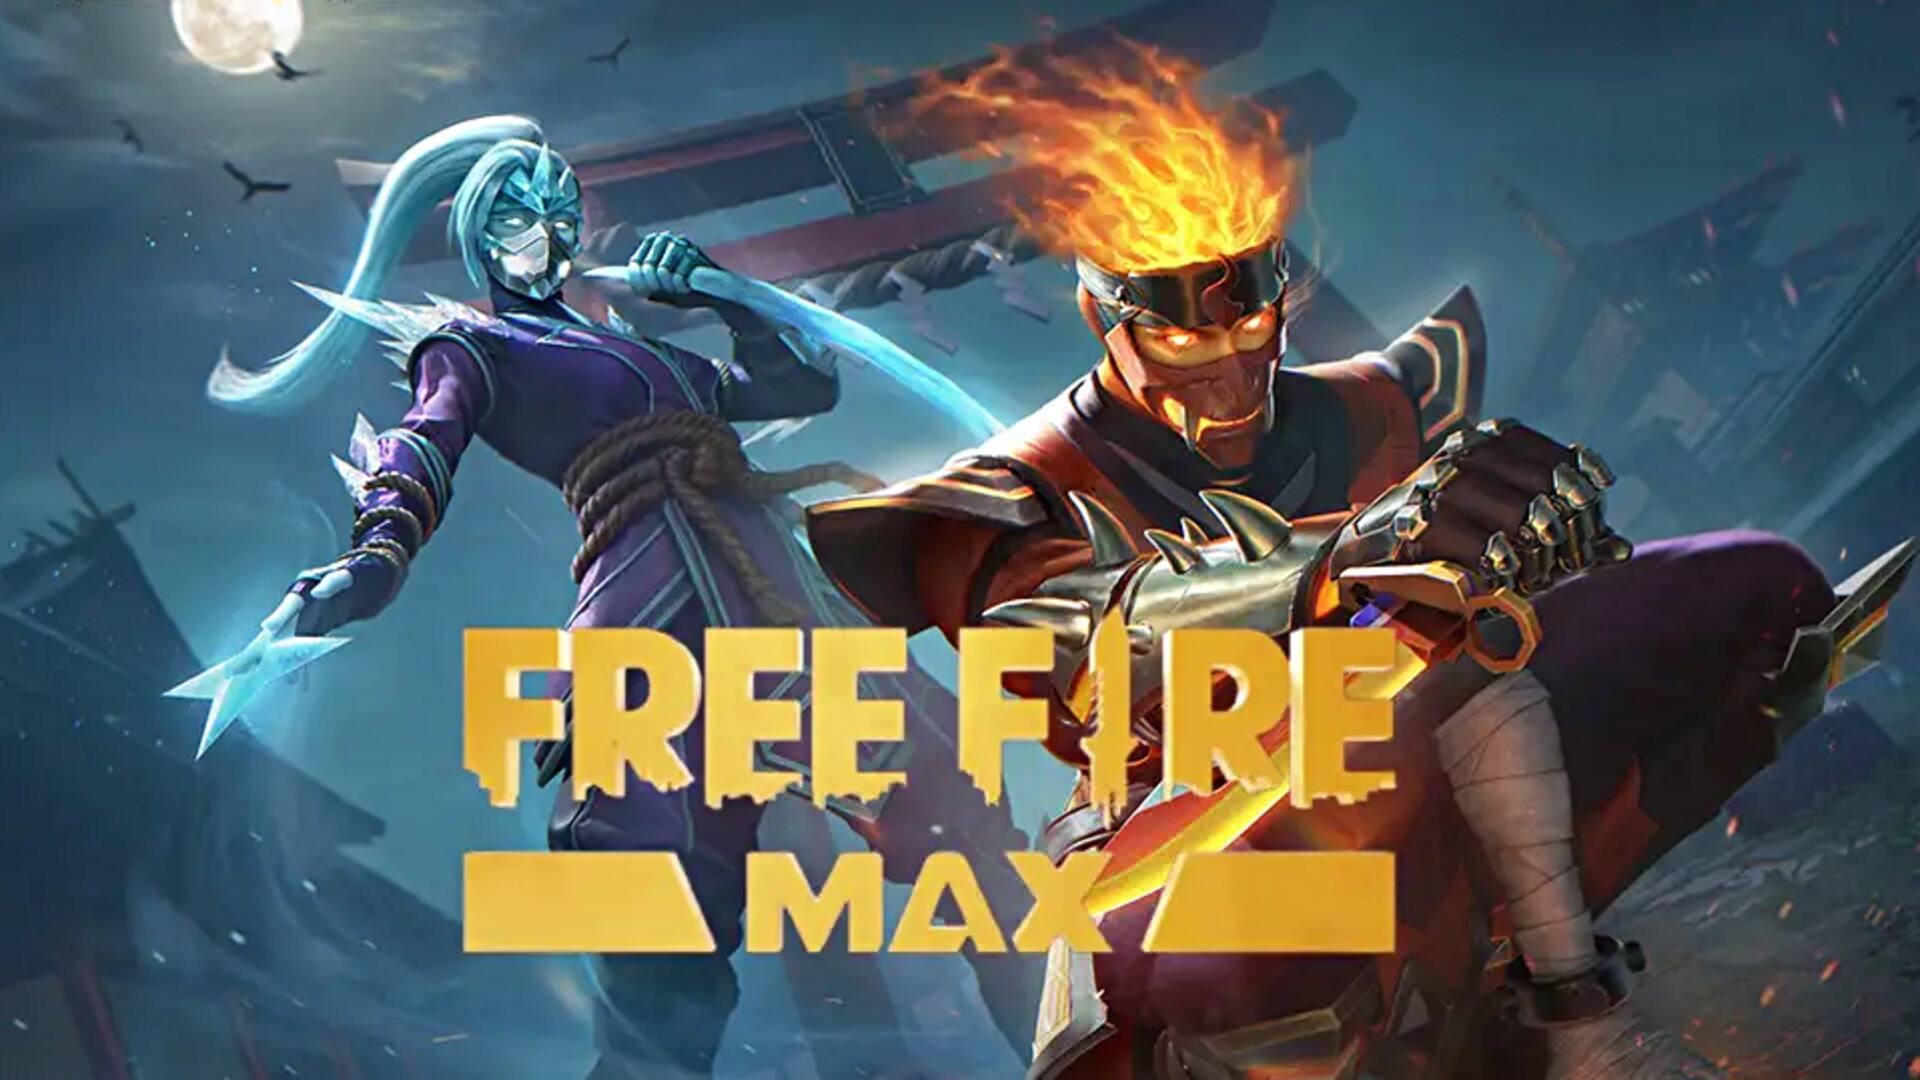 Today's Garena Free Fire MAX redeem codes for in-game prizes